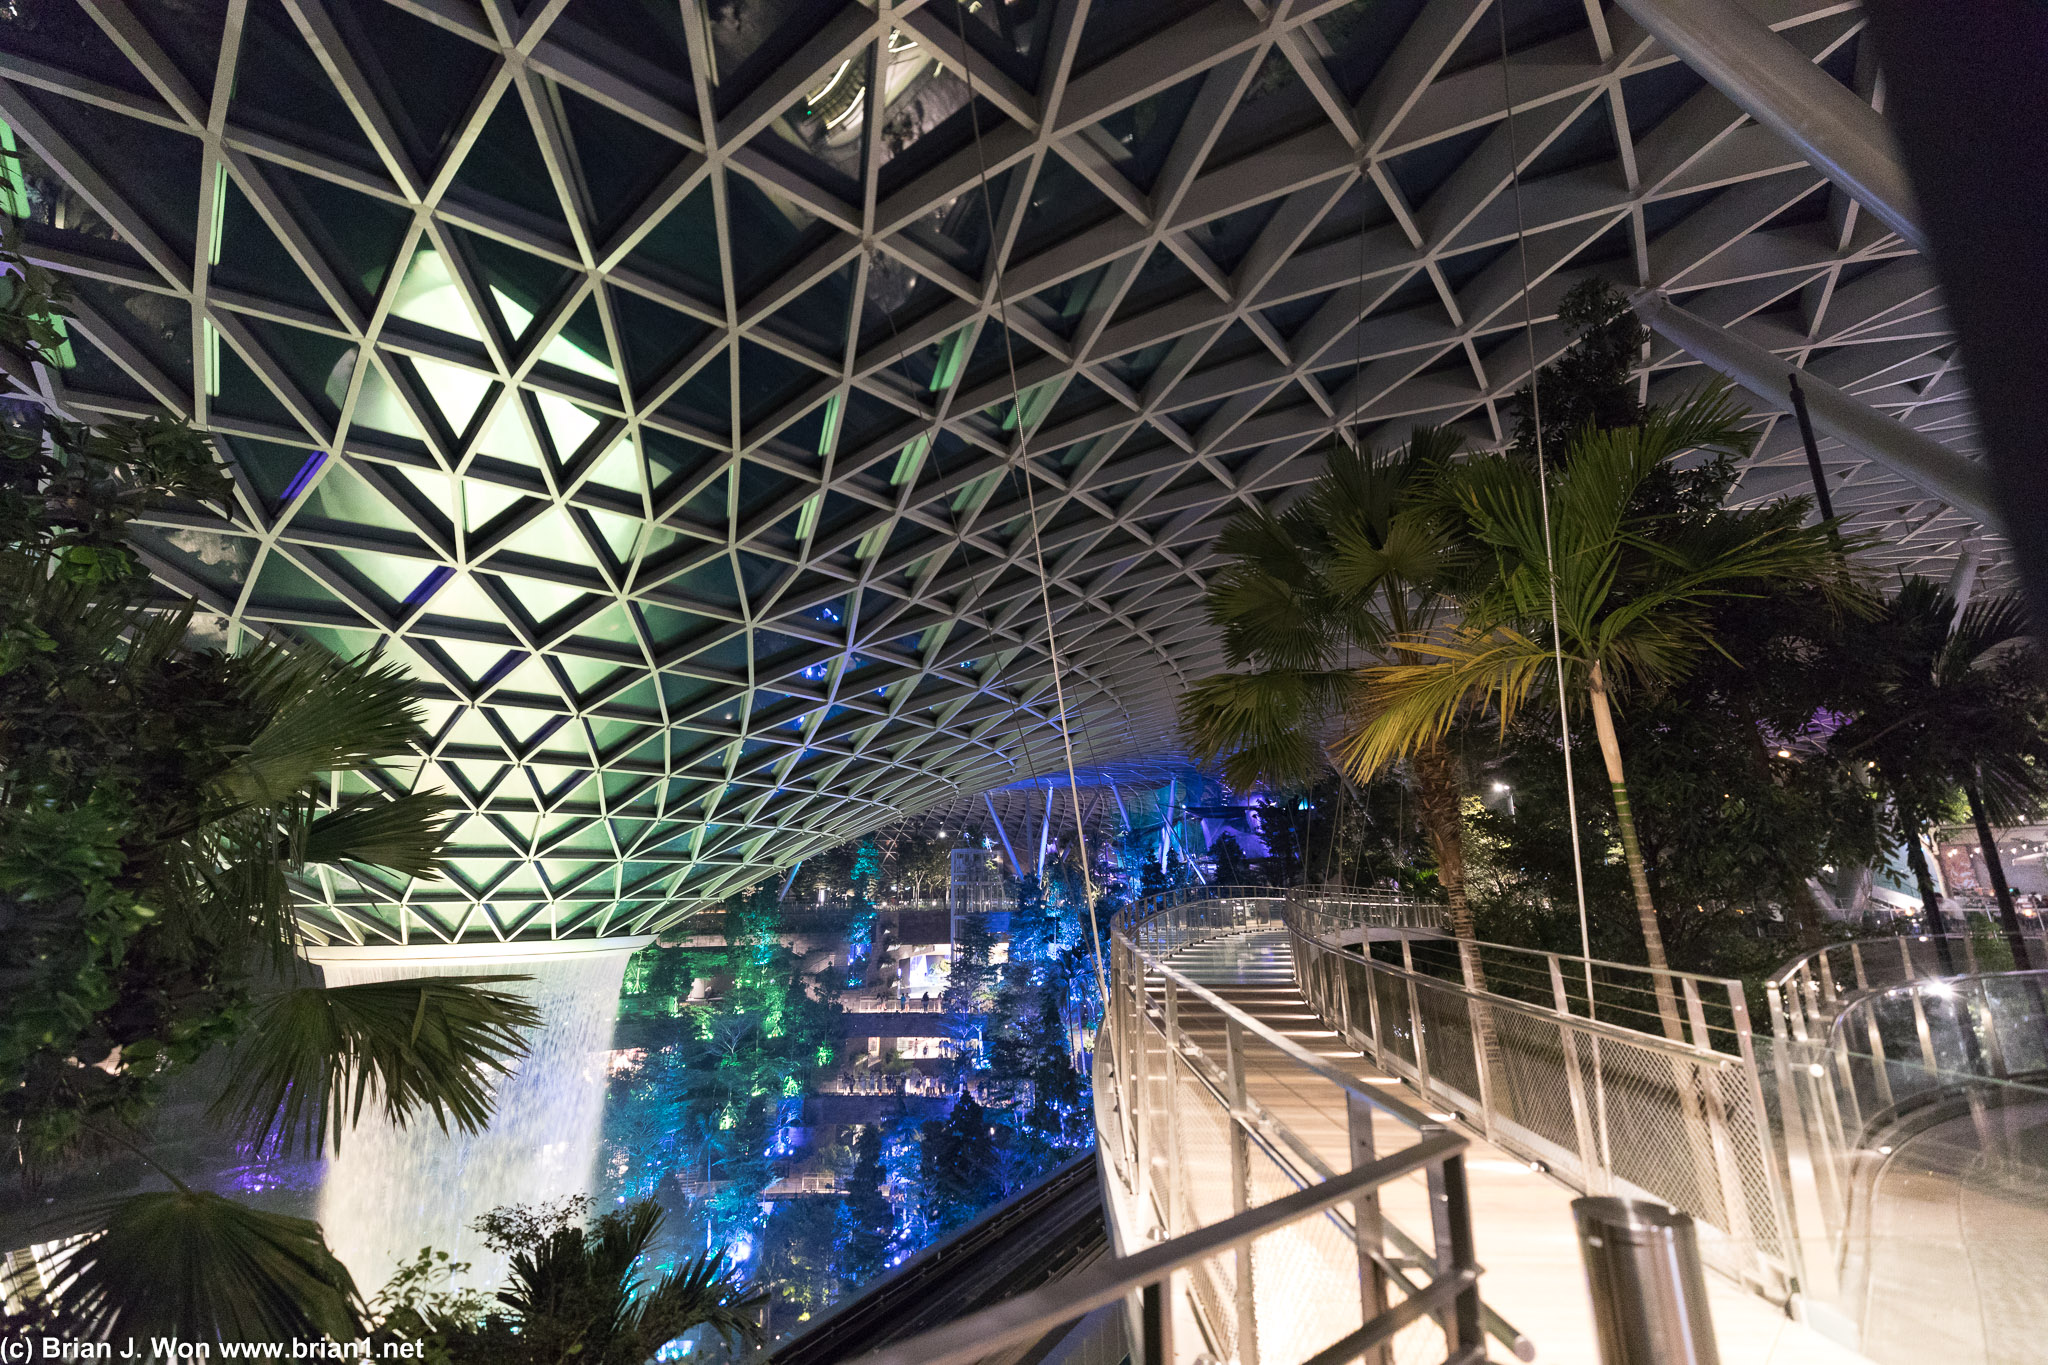 The Canopy Park inside Jewel Changi isn't open until 10 June. Might have to come back to check it out!